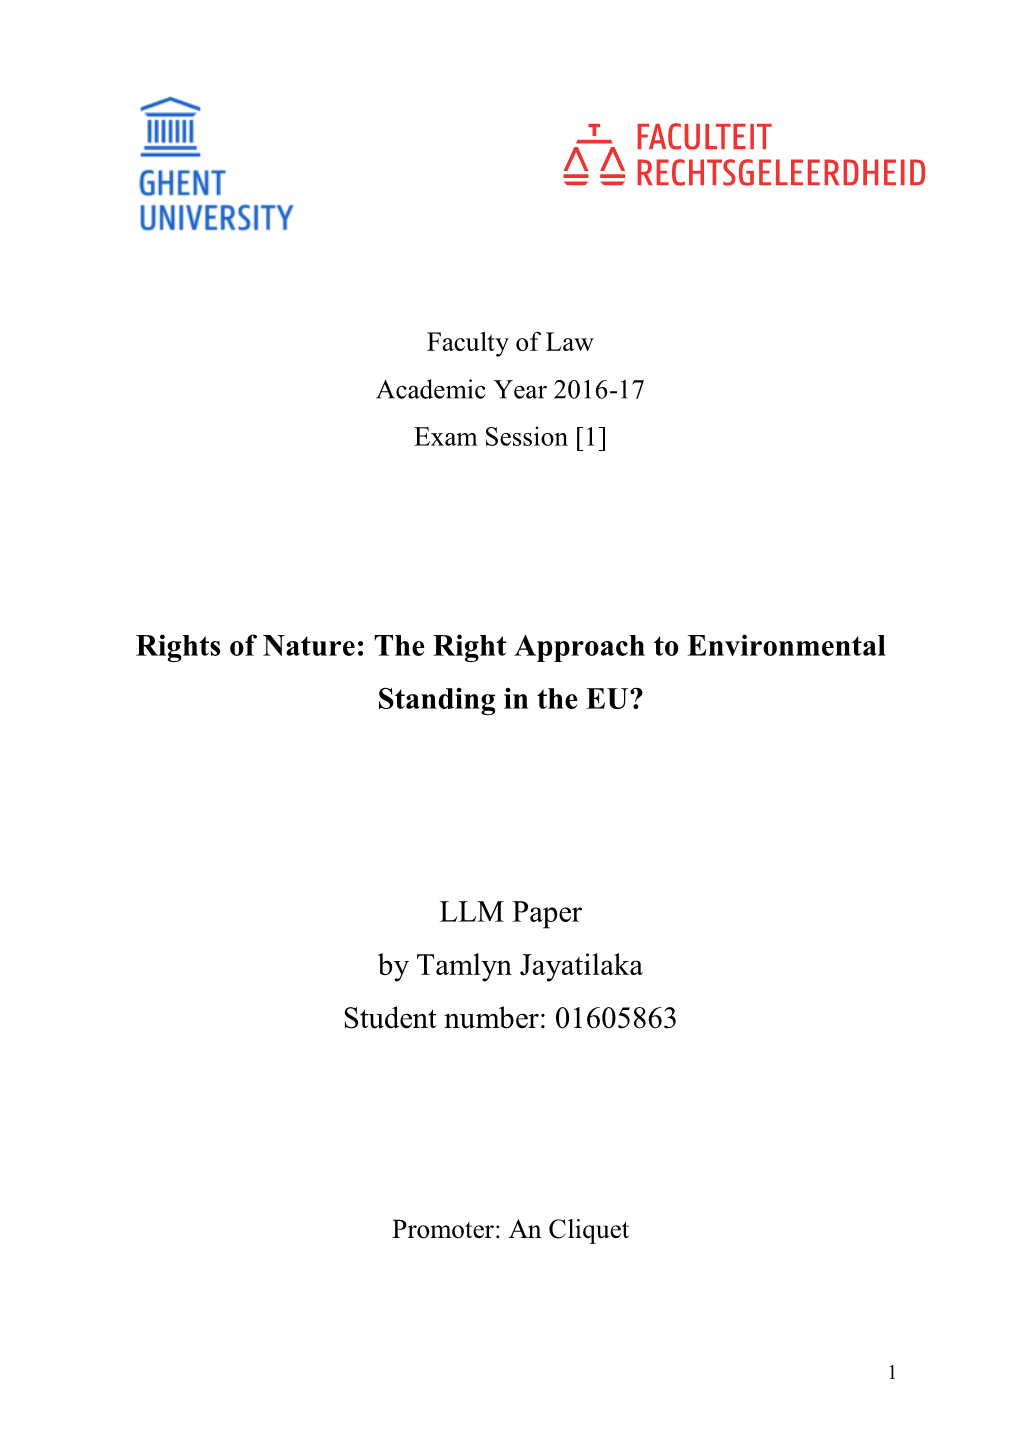 Rights of Nature: the Right Approach to Environmental Standing in the EU? LLM Paper by Tamlyn Jayatilaka Student Number: 0160586